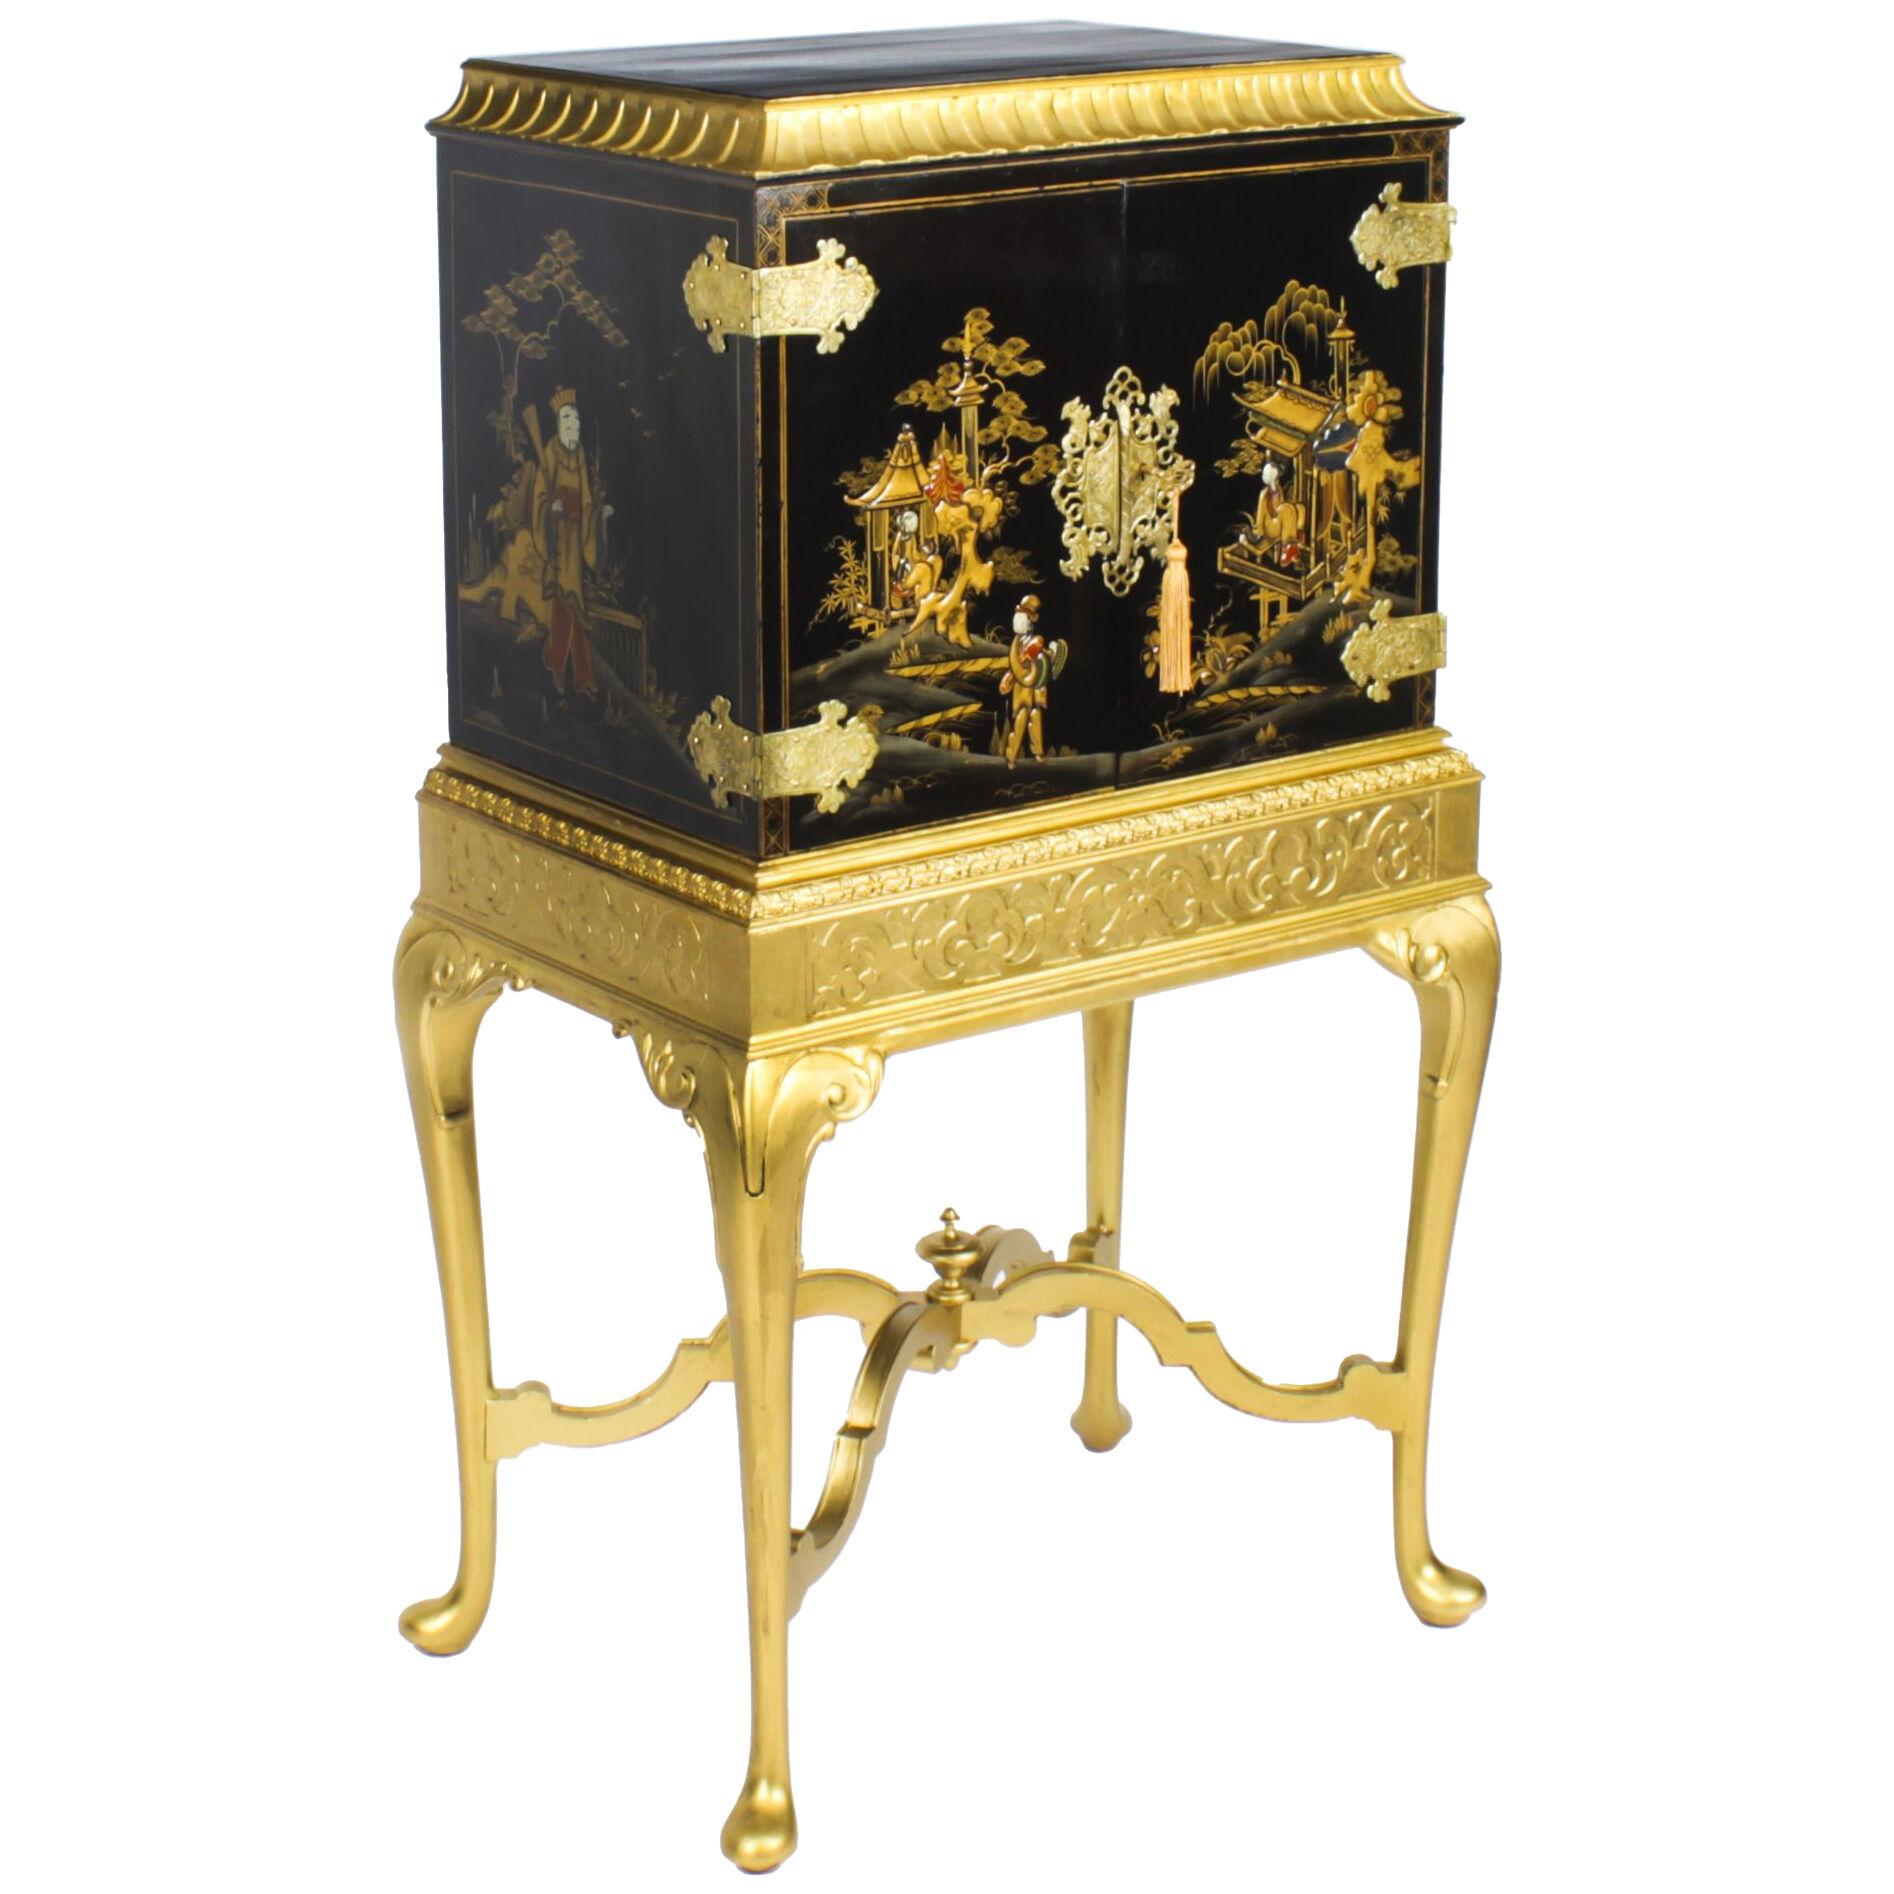 Antique Chinoiserie Lacquer Cabinet on Giltwood Stand Circa 1900